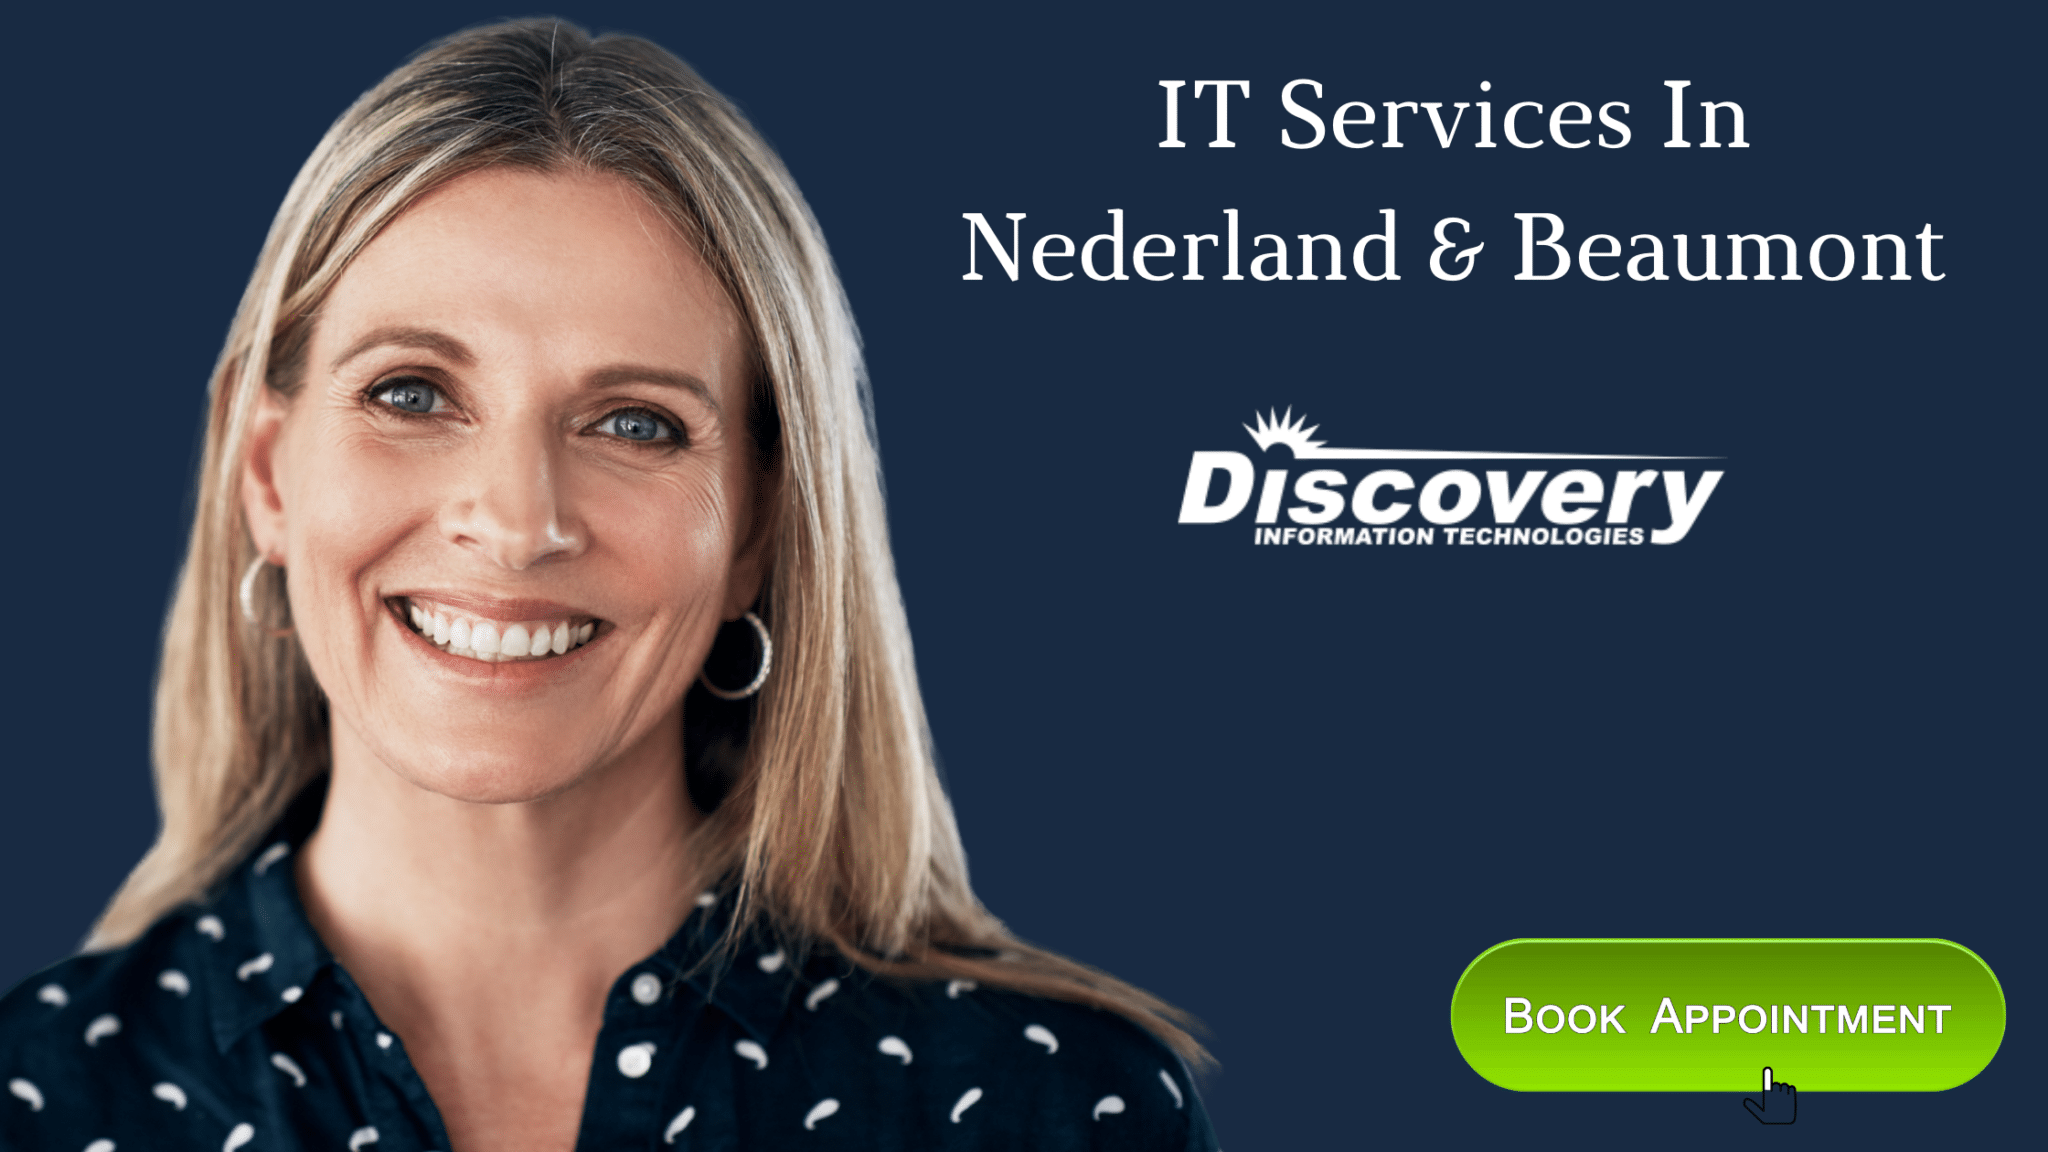 IT Services In Nederland & Beaumont